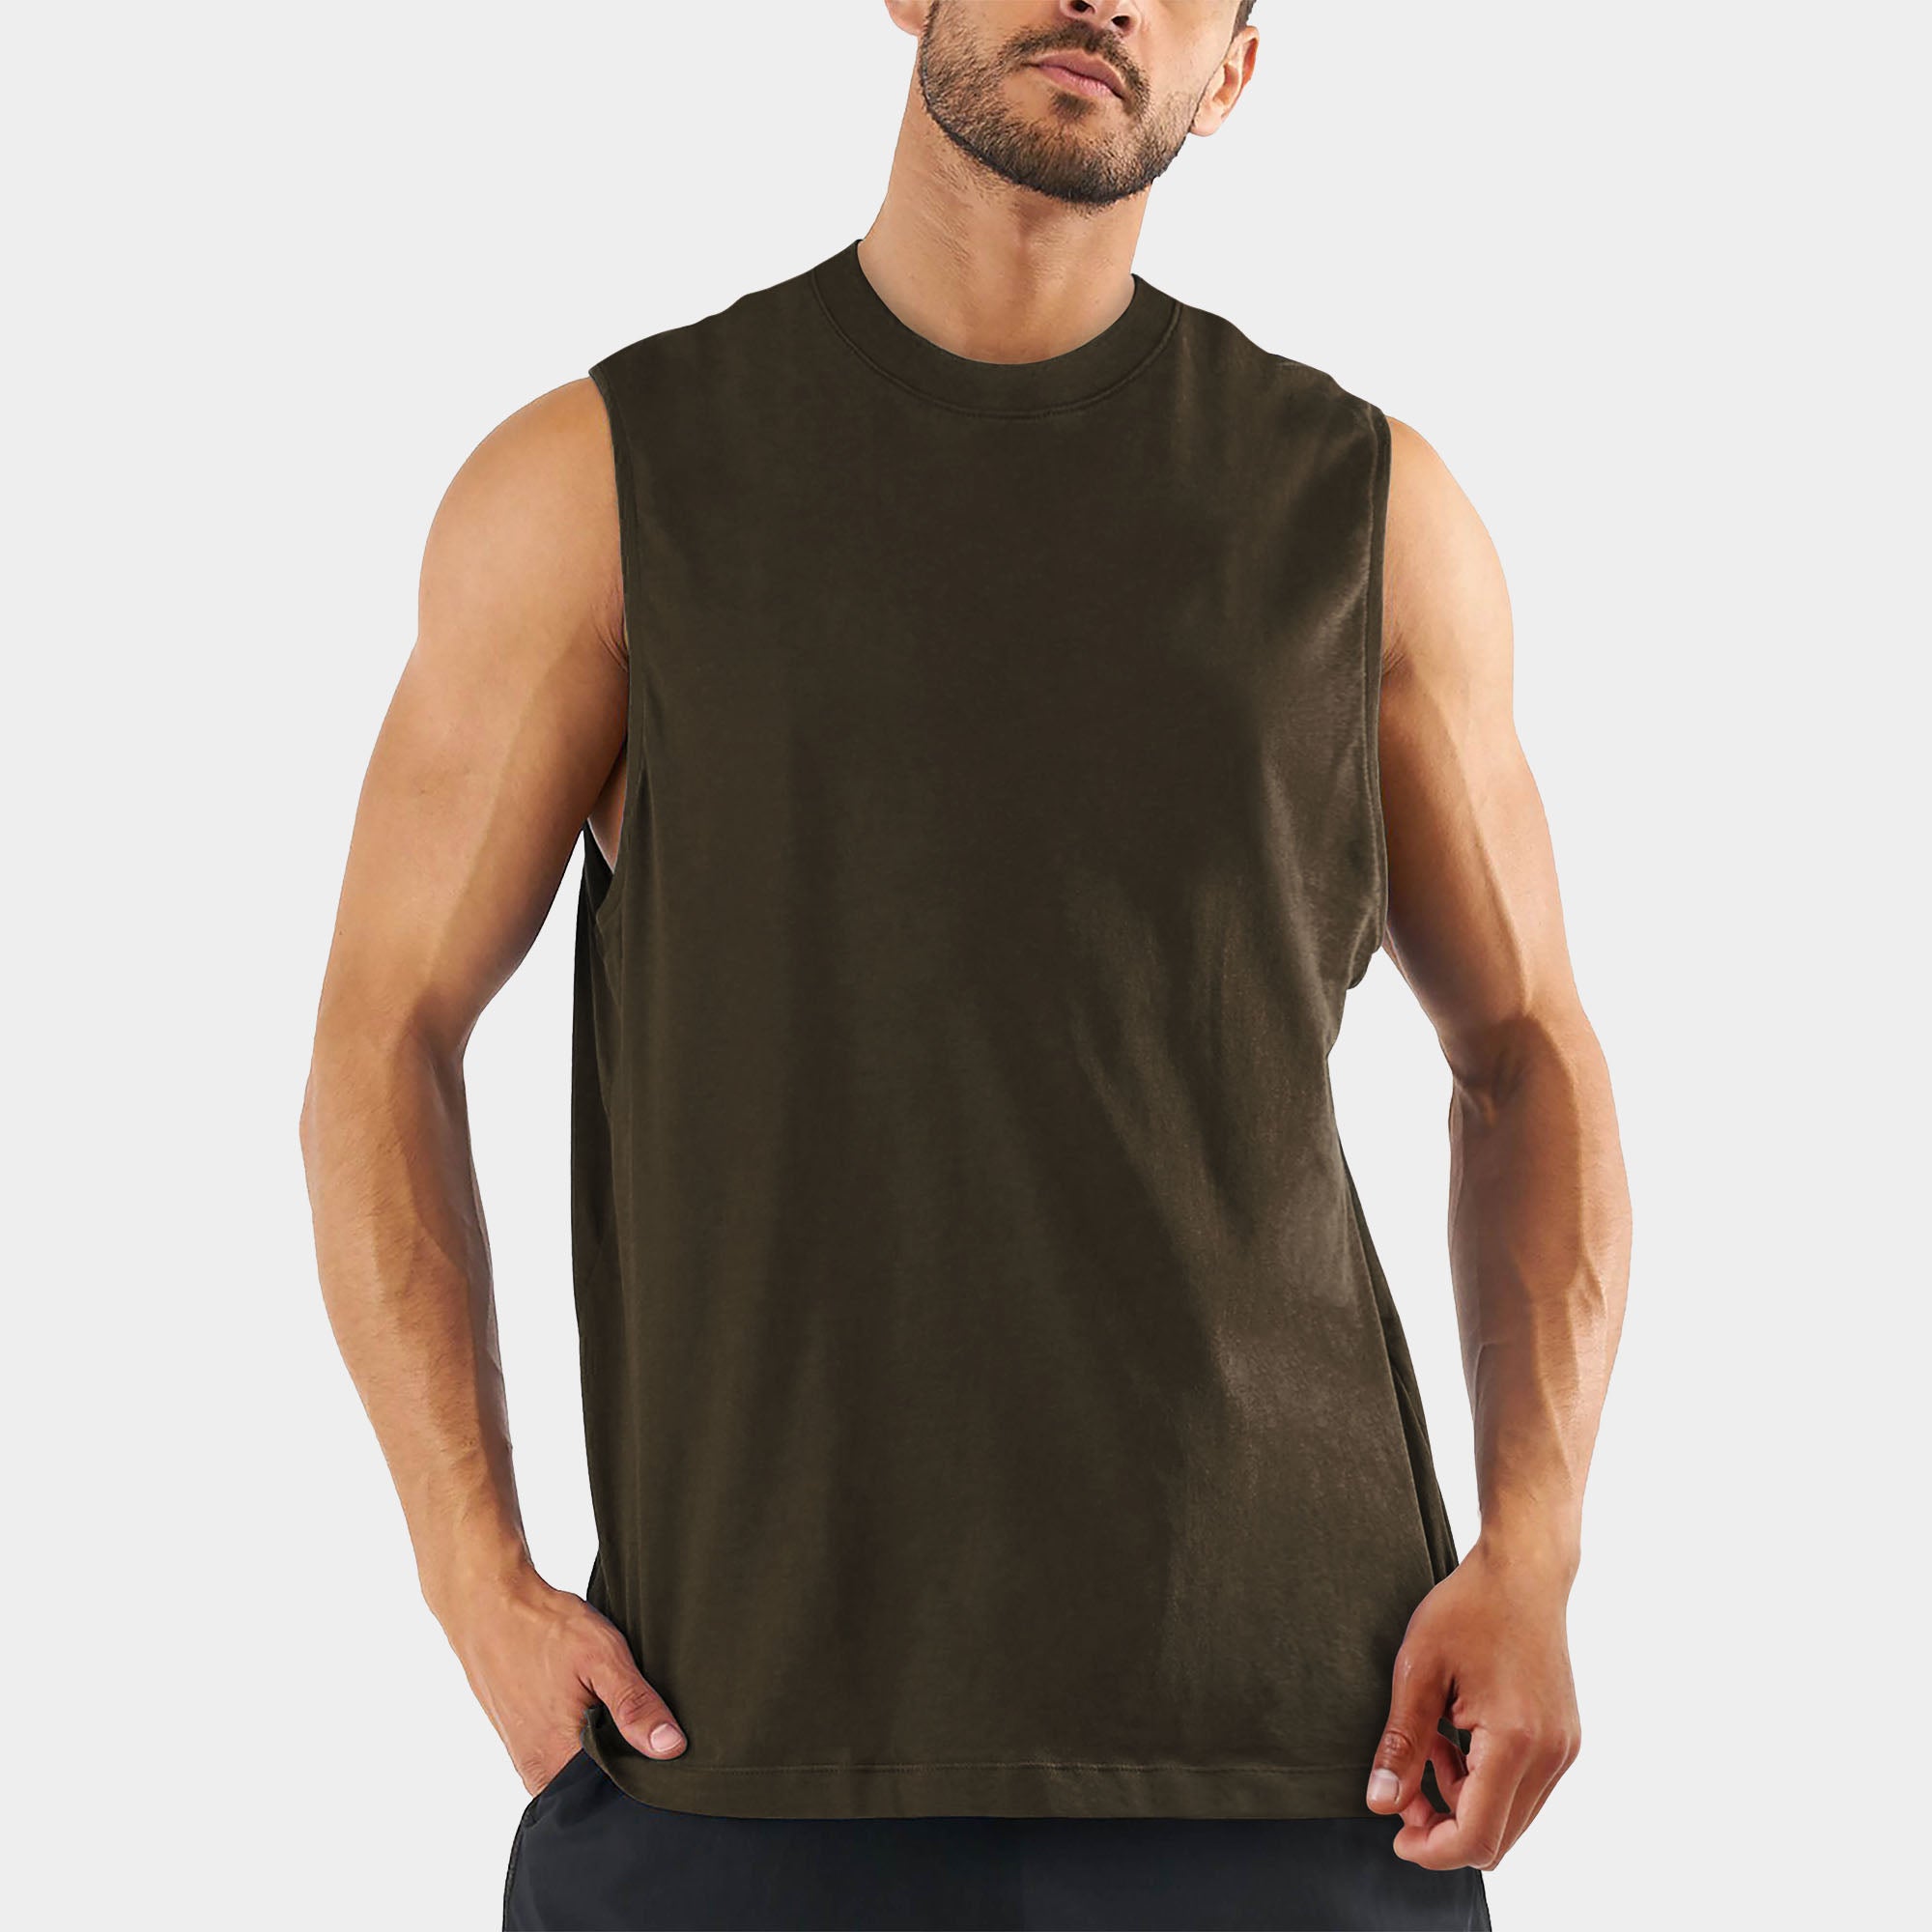 muscle_tank top_for_mens_sleeveless jersey_t shirt_jays_camiseta sin mangas_muscular_stafford shirts_youth_3xl_thermal tops_club dress_big and tall_tutle necks_shurt_muscle_topes_peterbilt_heavyweight_heavy weight _duty_ready_heather gray_cotton_roomie shirt_gym workout_without undershirt_black sando_cutoff sports_vivid color_colour_Chocolate